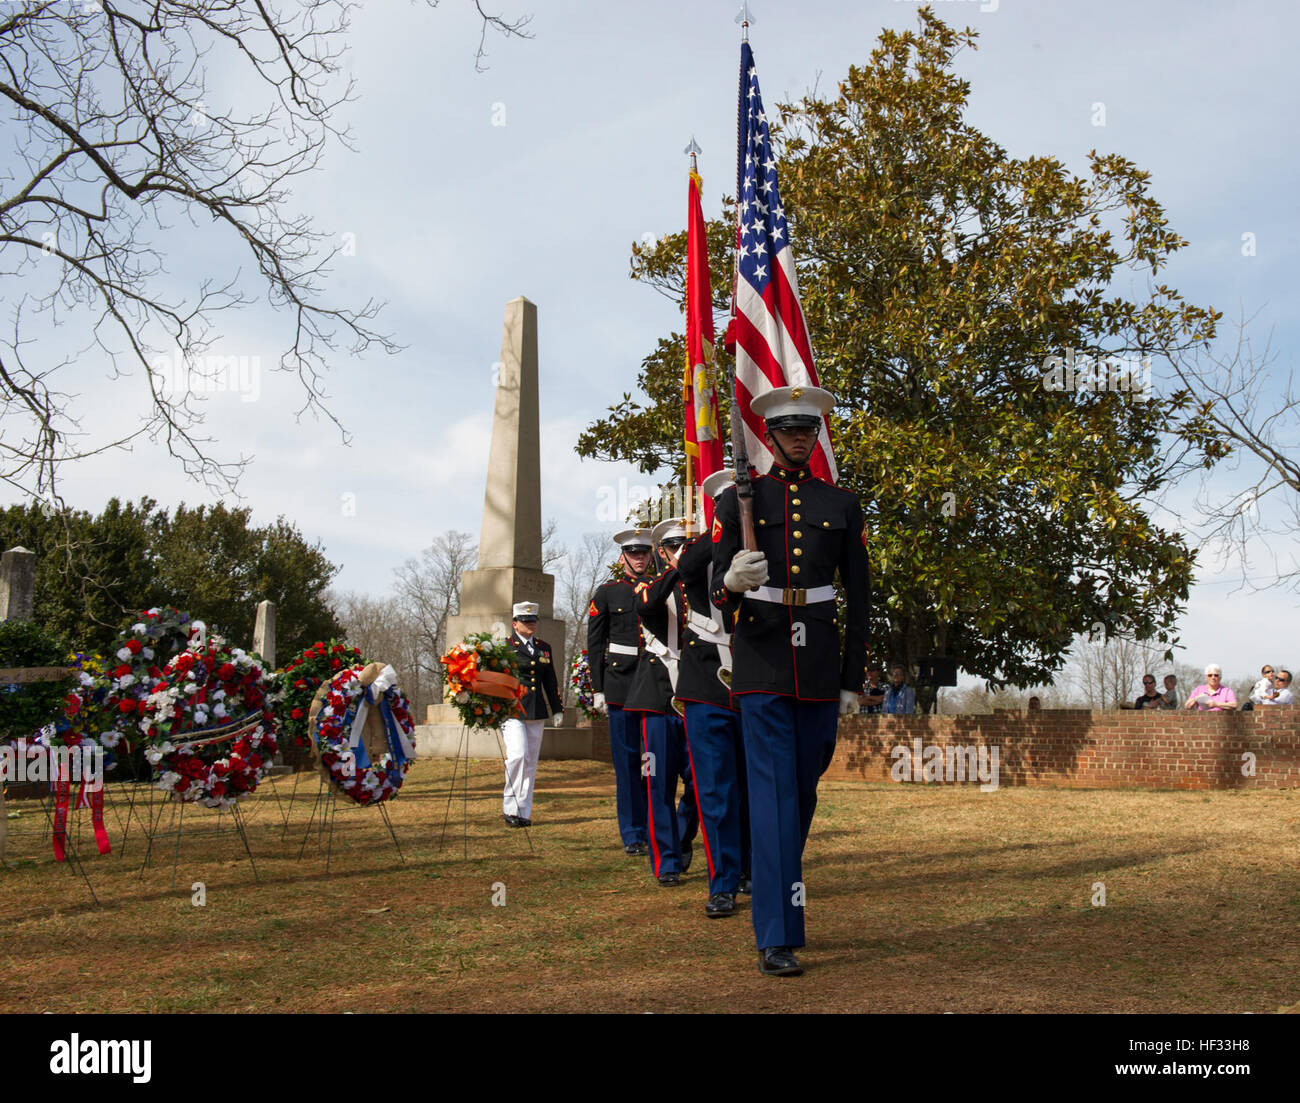 U.S. Marines with Marine Corps Base Quantico's Color Guard retire the Colors to close the Presidential wreath laying ceremony held at the final resting place of the 4th President of the United States, James Madison, also known as the Father of the Constitution, at his home at Montpelier, Orange, Va., March 16, 2015. This event was held in commemoration of the 264th anniversary of the birthdate of Madison, and has also been decreed as James Madison Appreciation Day for the Commonwealth of Virginia. (Official United States Marine Corps photo by Kathy Reesey/Released) Madison Wreath Laying Ceremo Stock Photo